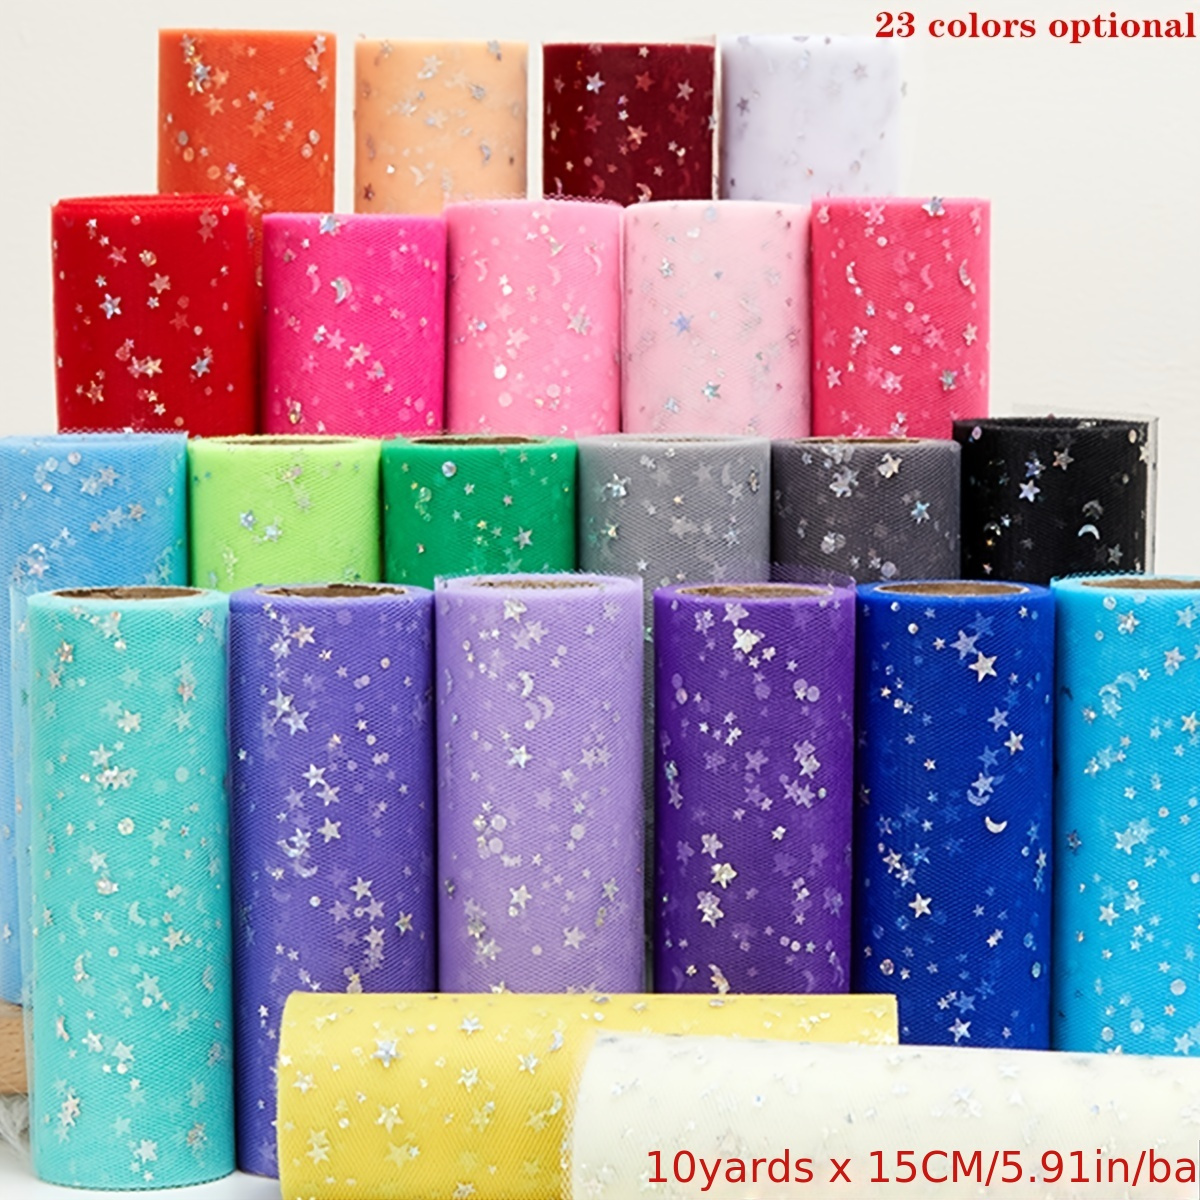 

10 Yards Star And Moon Laser Sequins Tulle Roll Organza Party Decoration Tutu Fabric Wedding Decoration Sewing Mesh Organza Tutu Skirt Accessories Diy